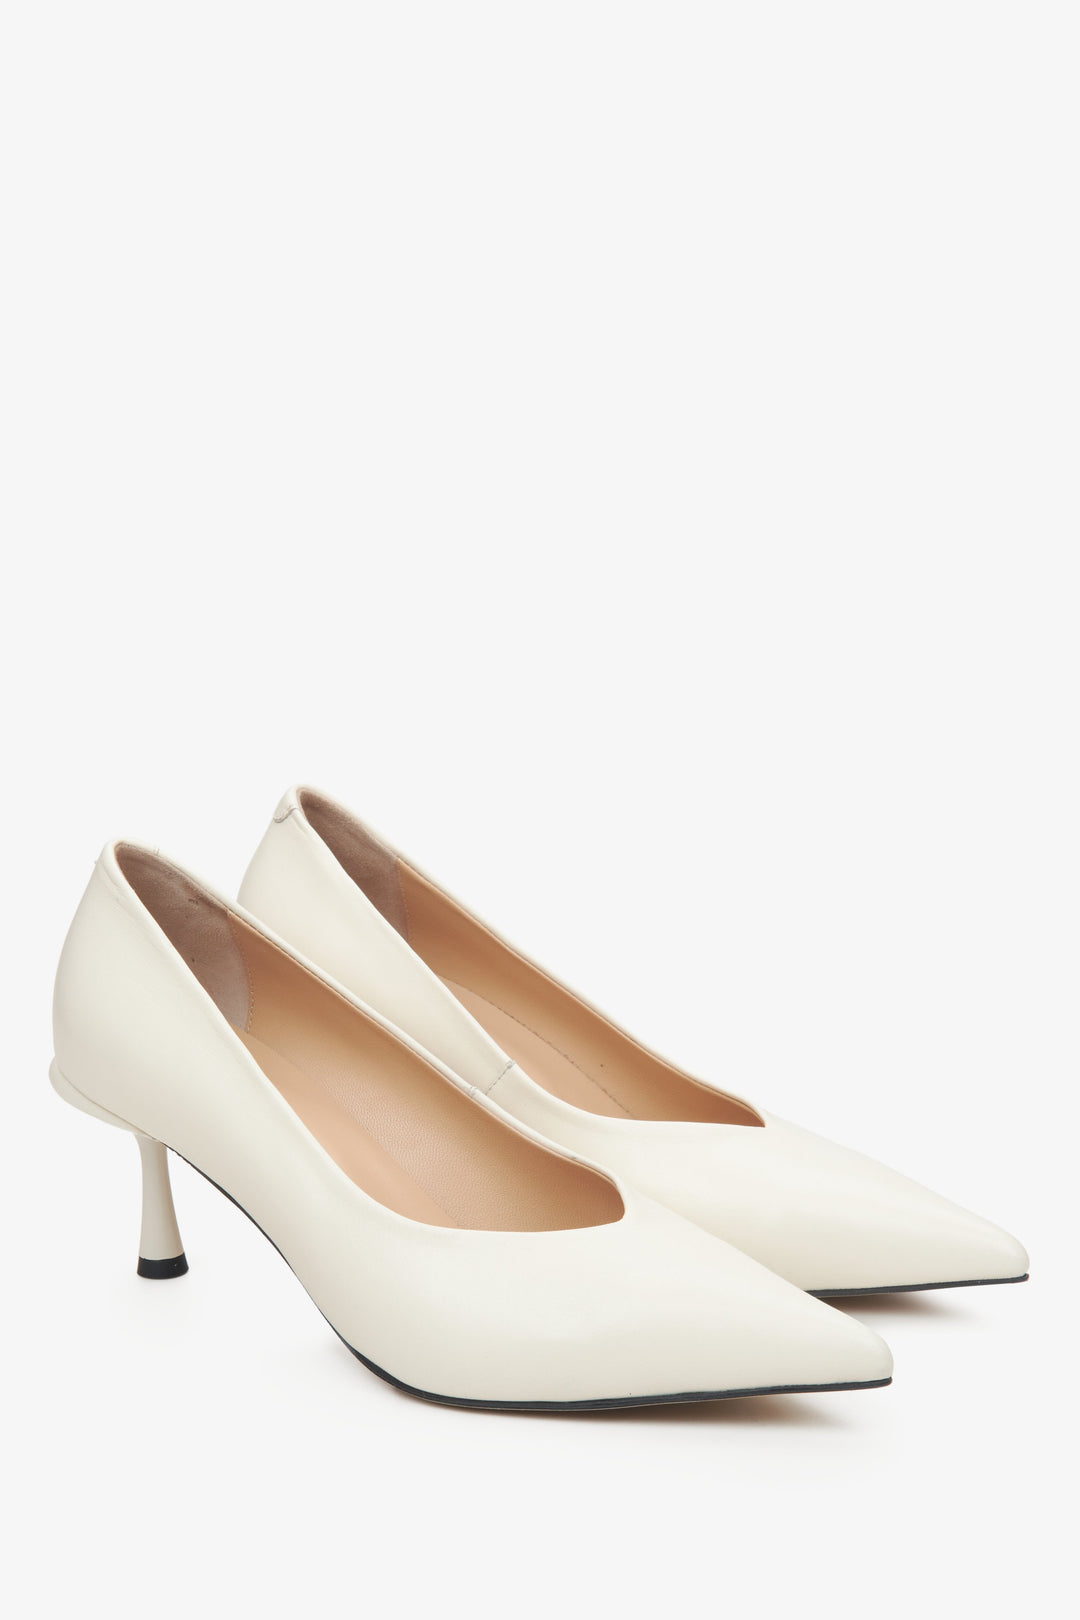 Cream-beige women's pumps with a pointed toe by Estro.